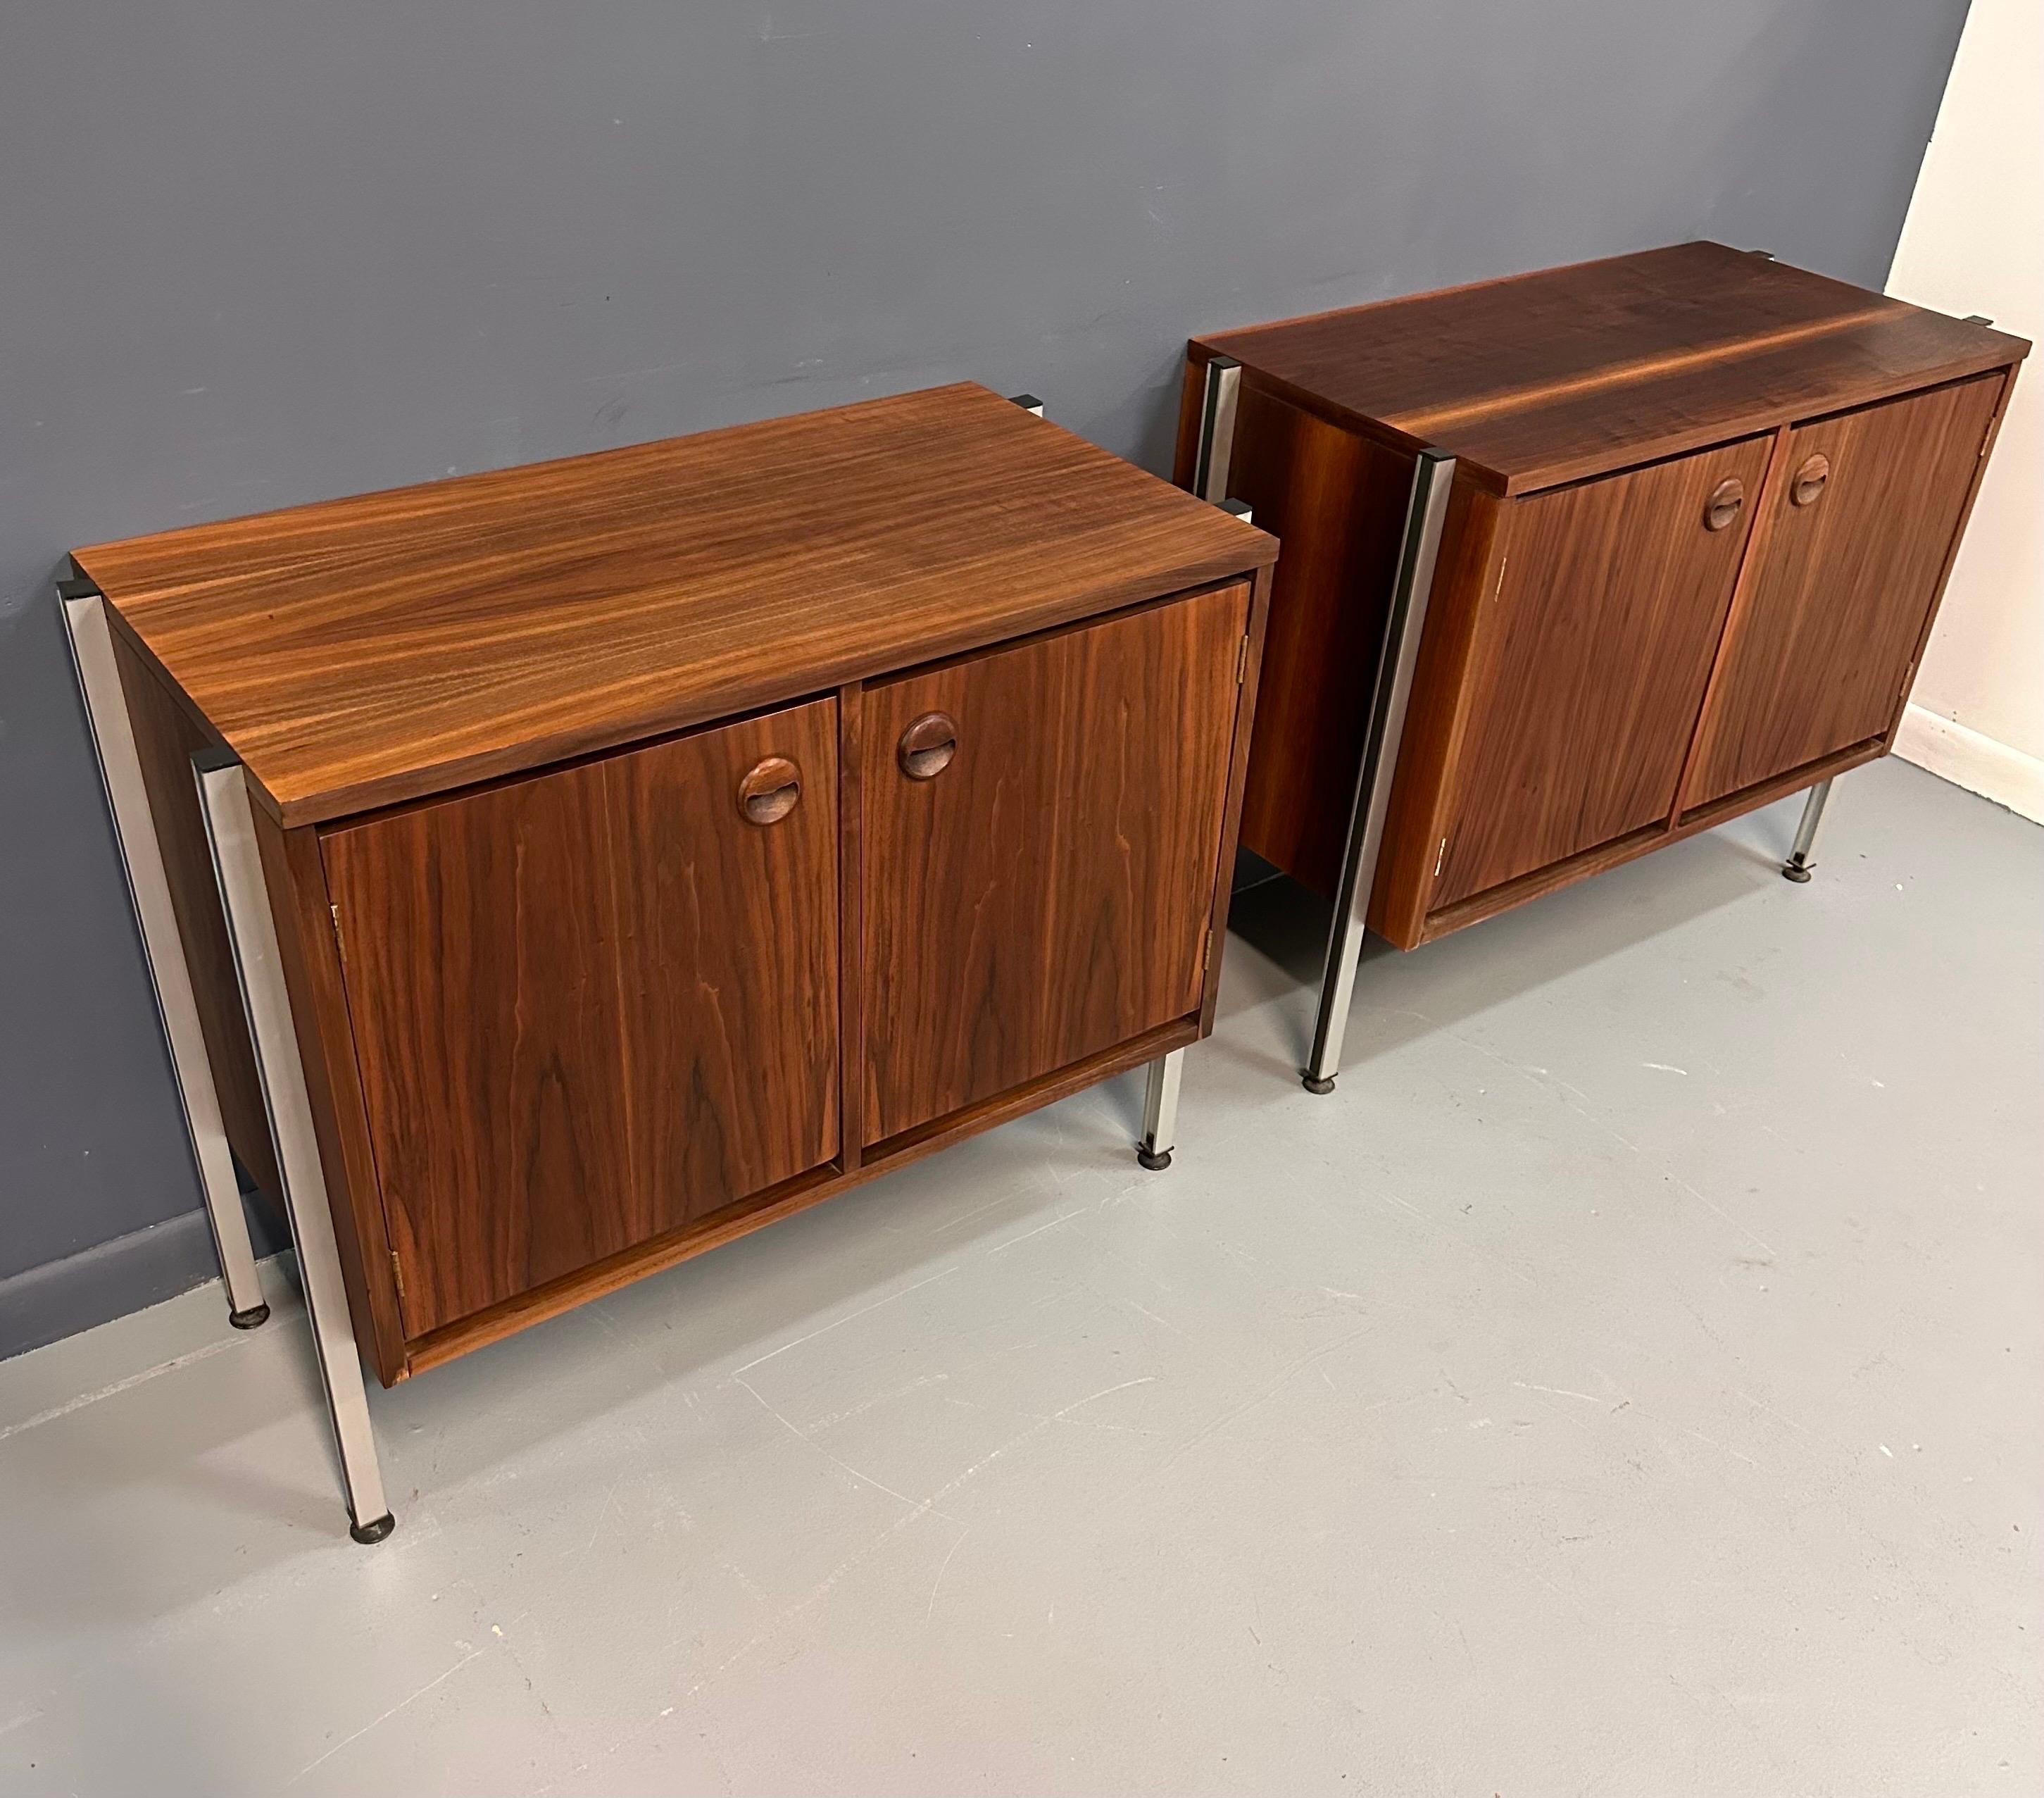 Pair of Midcentury Walnut Cabinets with Exposed Aluminum Legs Style of Wormley 1